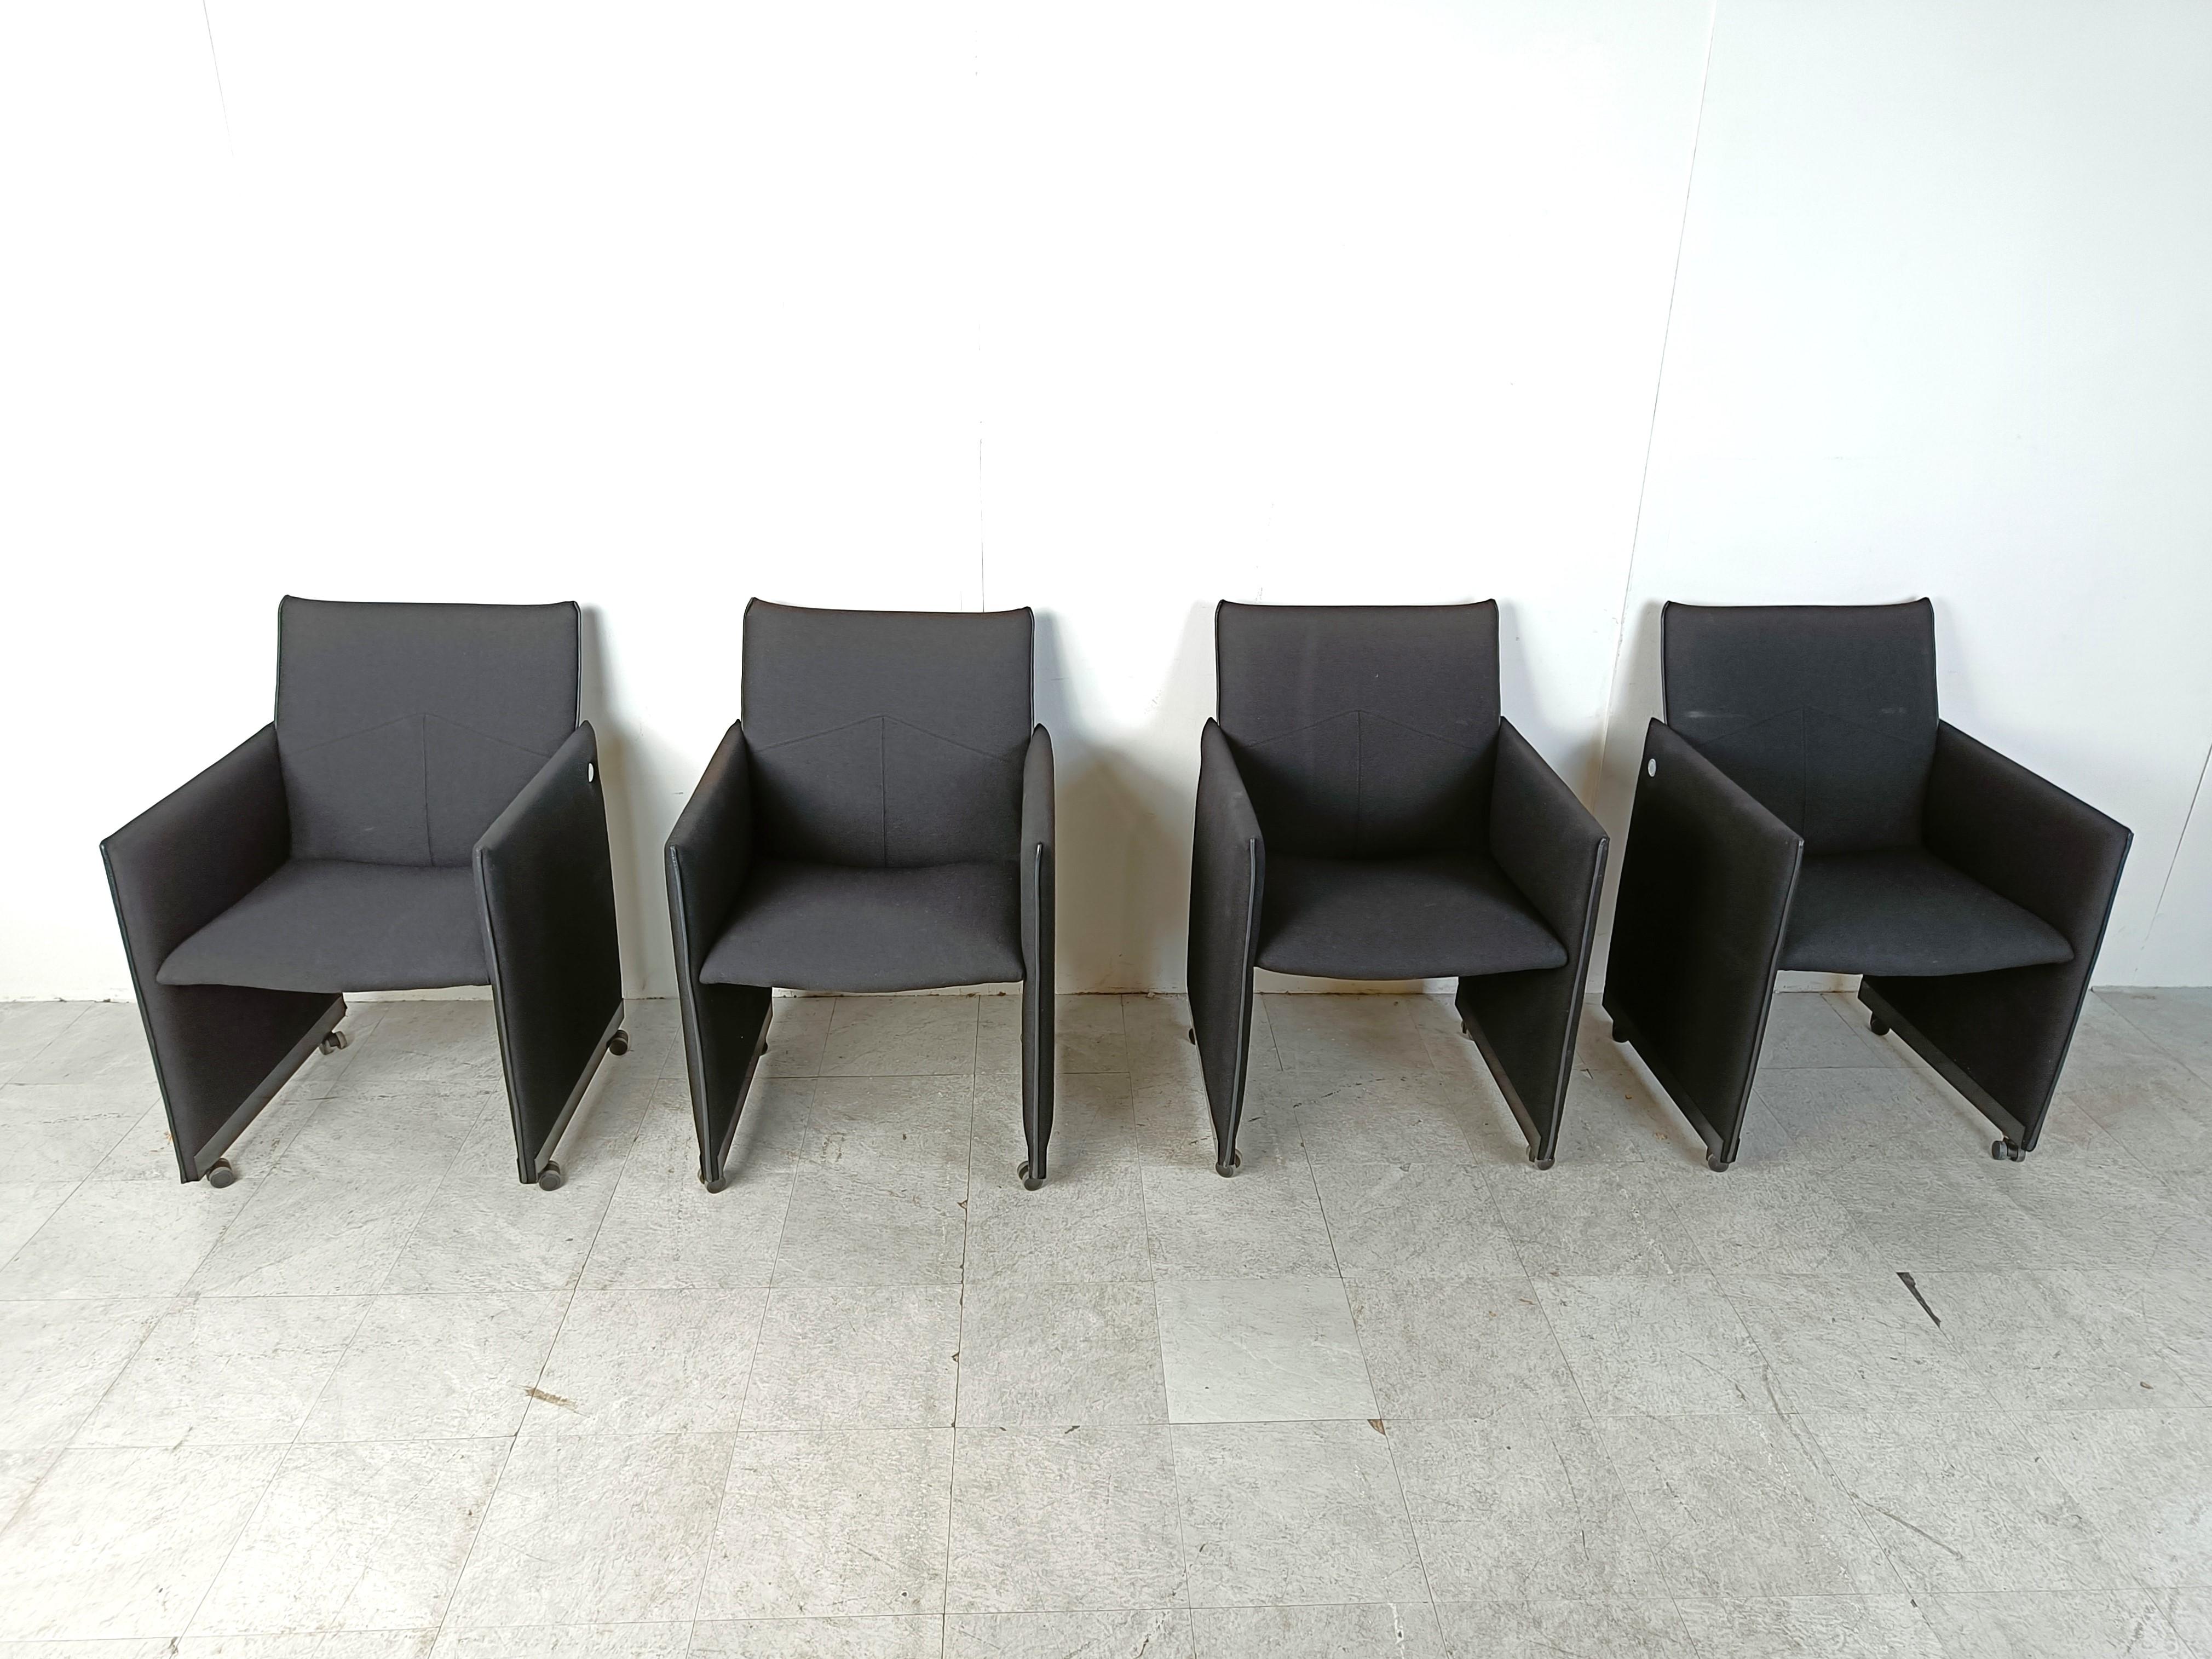 Set of 4 black fabric armchairs on casters designed by Geoffrey Harcourt for Artifort.

The chairs are labeled on the side with a round metal plate and marked underneath the seates.

Handy casters make the chairs easy to move. The chairs are also